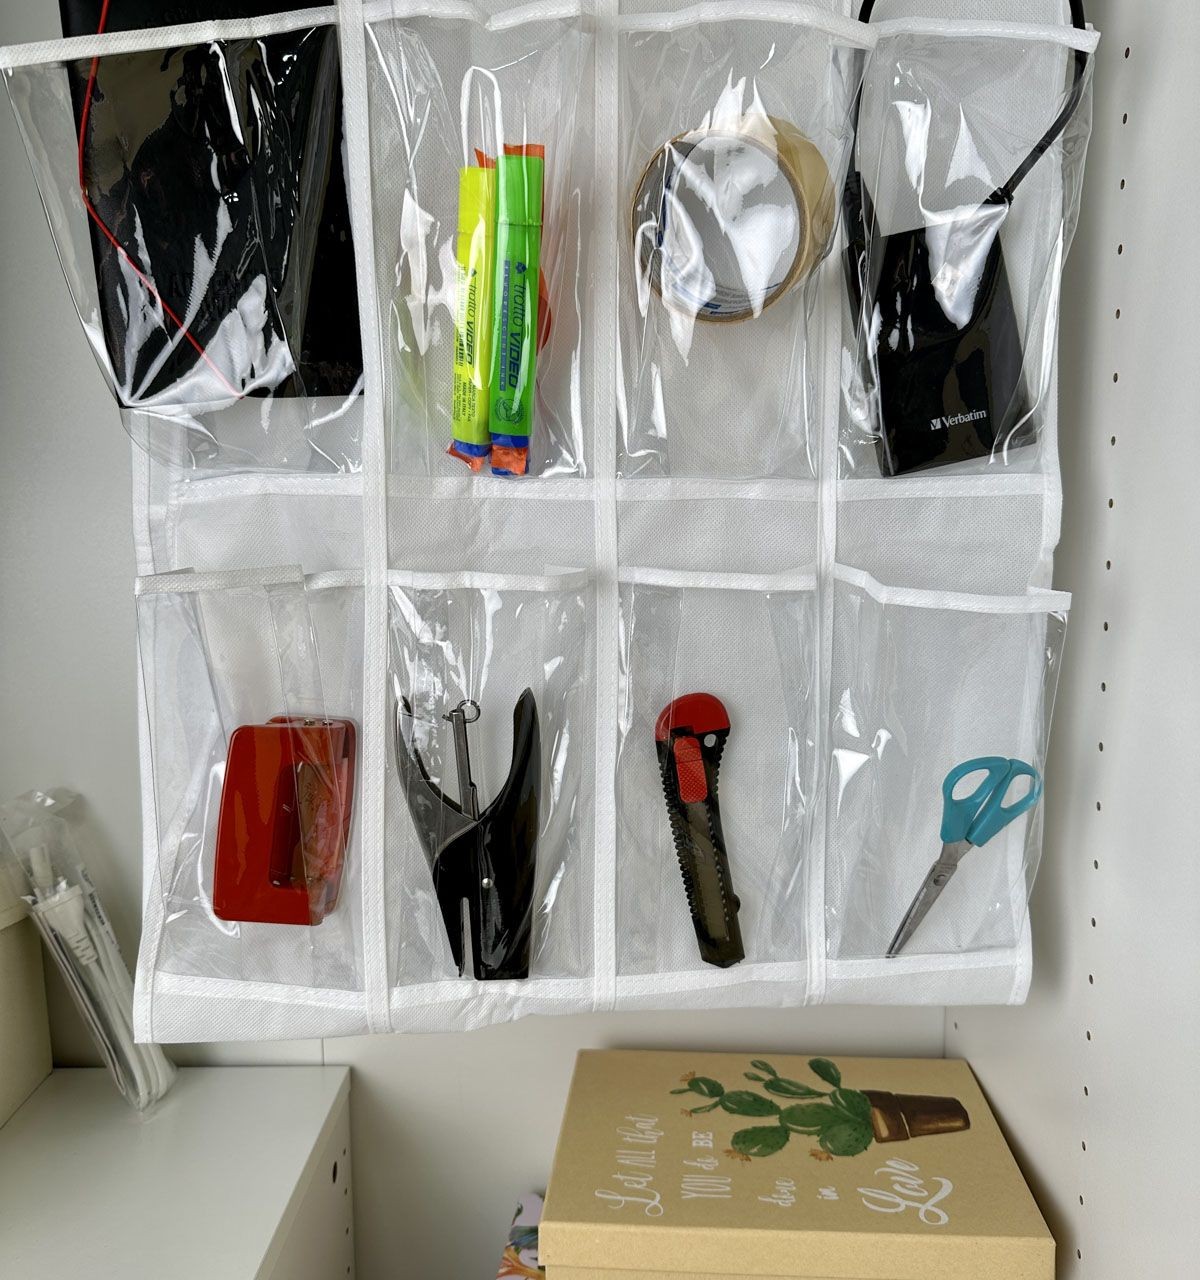 Use a Shoe Organizer to Store Extra Office Supplies